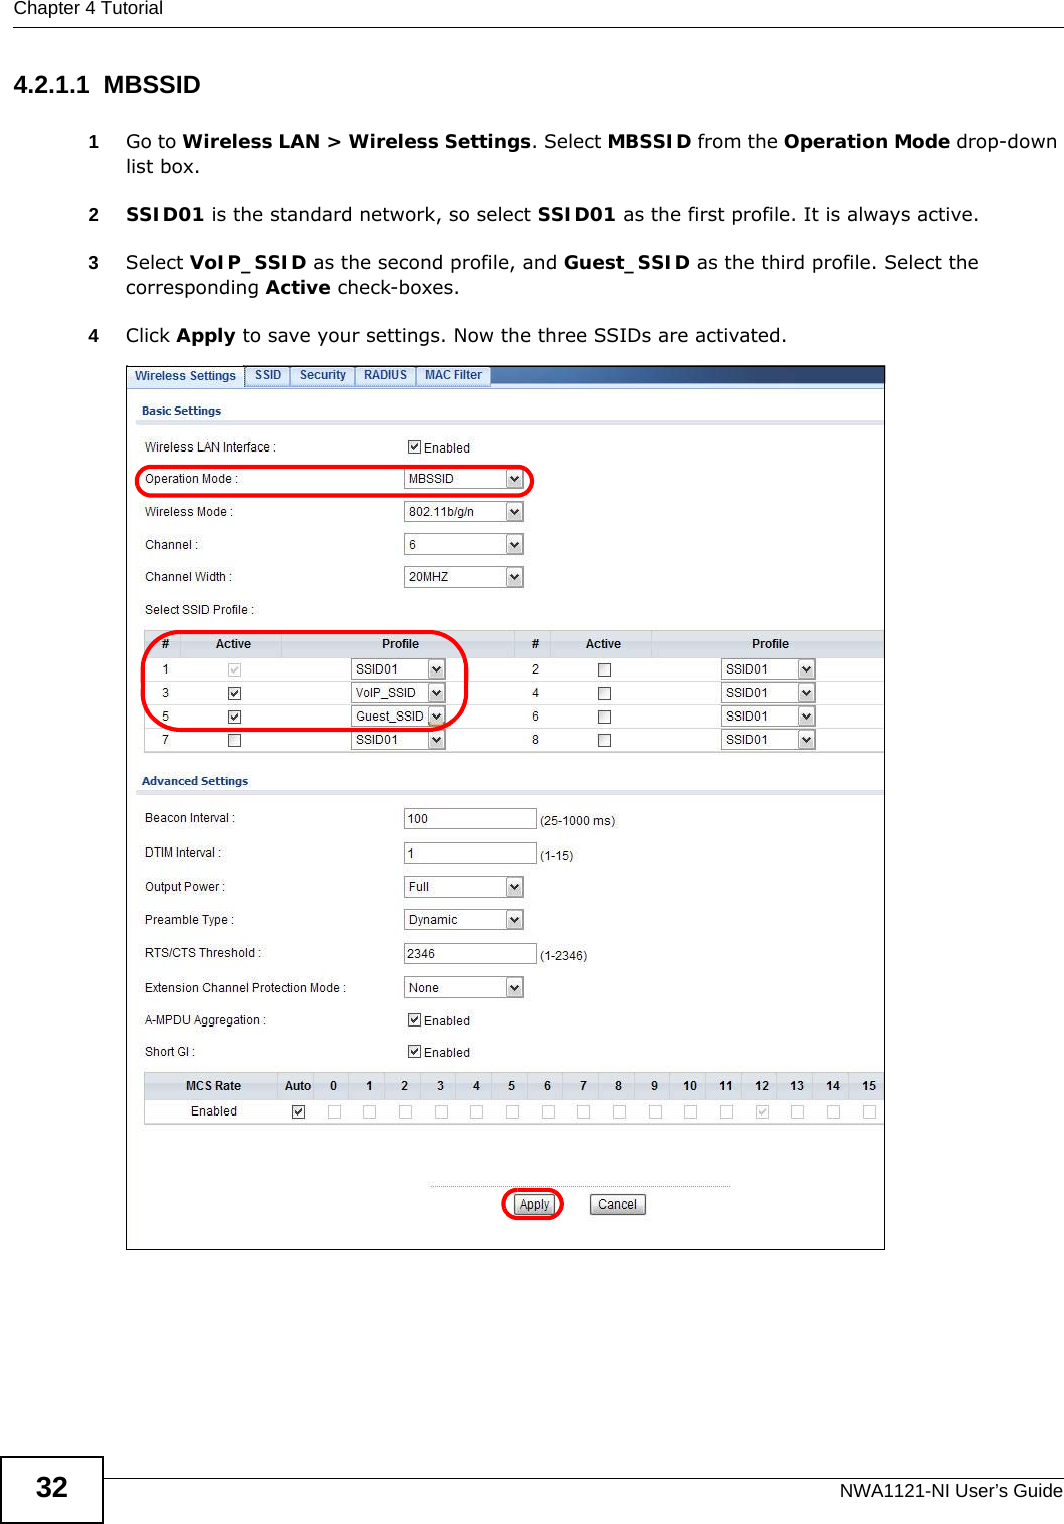 Chapter 4 TutorialNWA1121-NI User’s Guide324.2.1.1  MBSSID1Go to Wireless LAN &gt; Wireless Settings. Select MBSSID from the Operation Mode drop-down list box. 2SSID01 is the standard network, so select SSID01 as the first profile. It is always active. 3Select VoIP_SSID as the second profile, and Guest_SSID as the third profile. Select the corresponding Active check-boxes.4Click Apply to save your settings. Now the three SSIDs are activated.